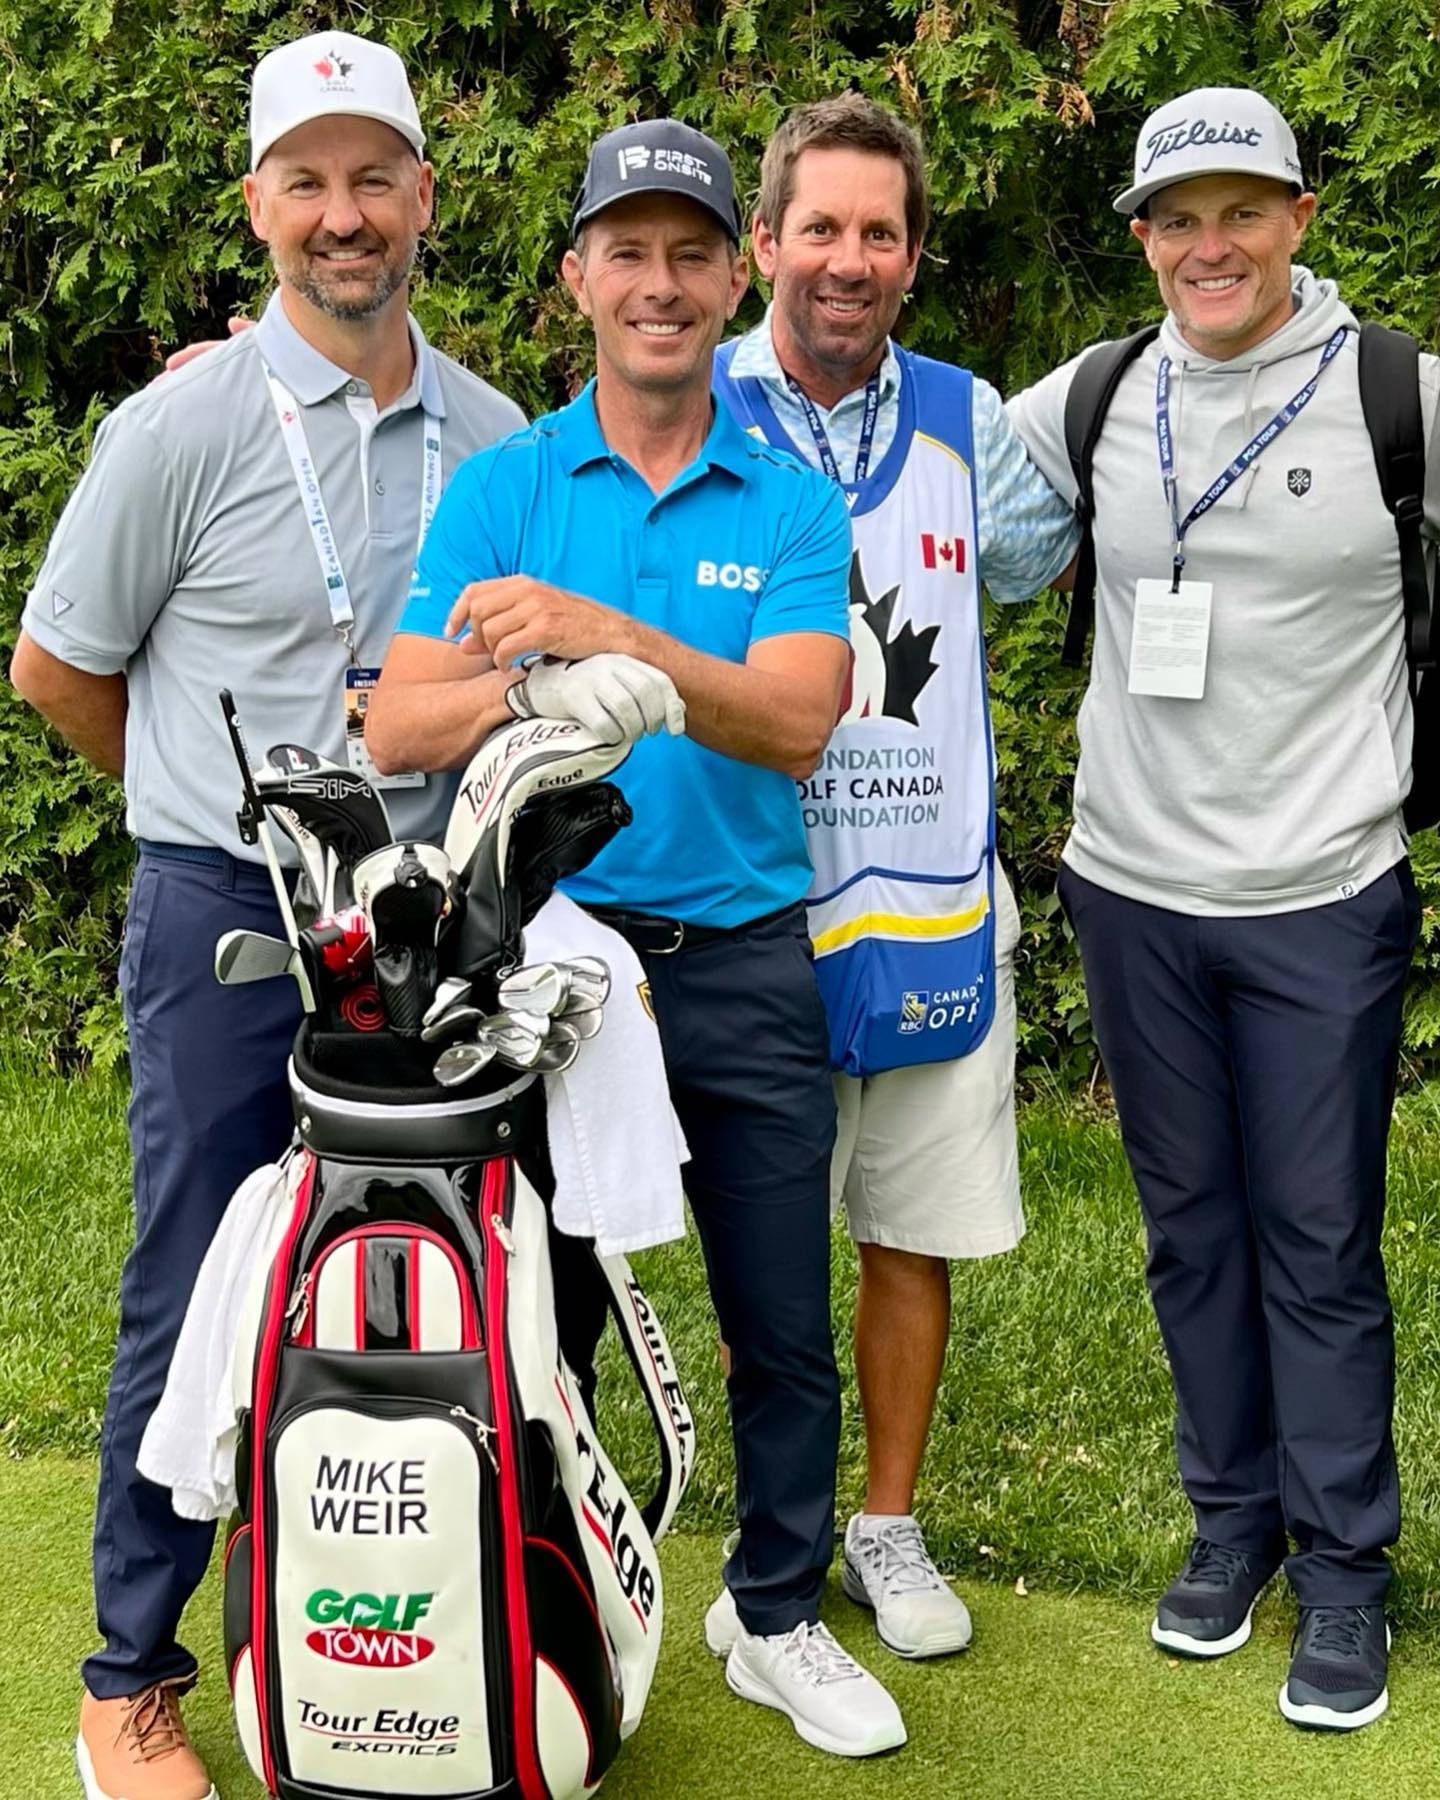 Mike Weir With Caddie And Others Wallpaper